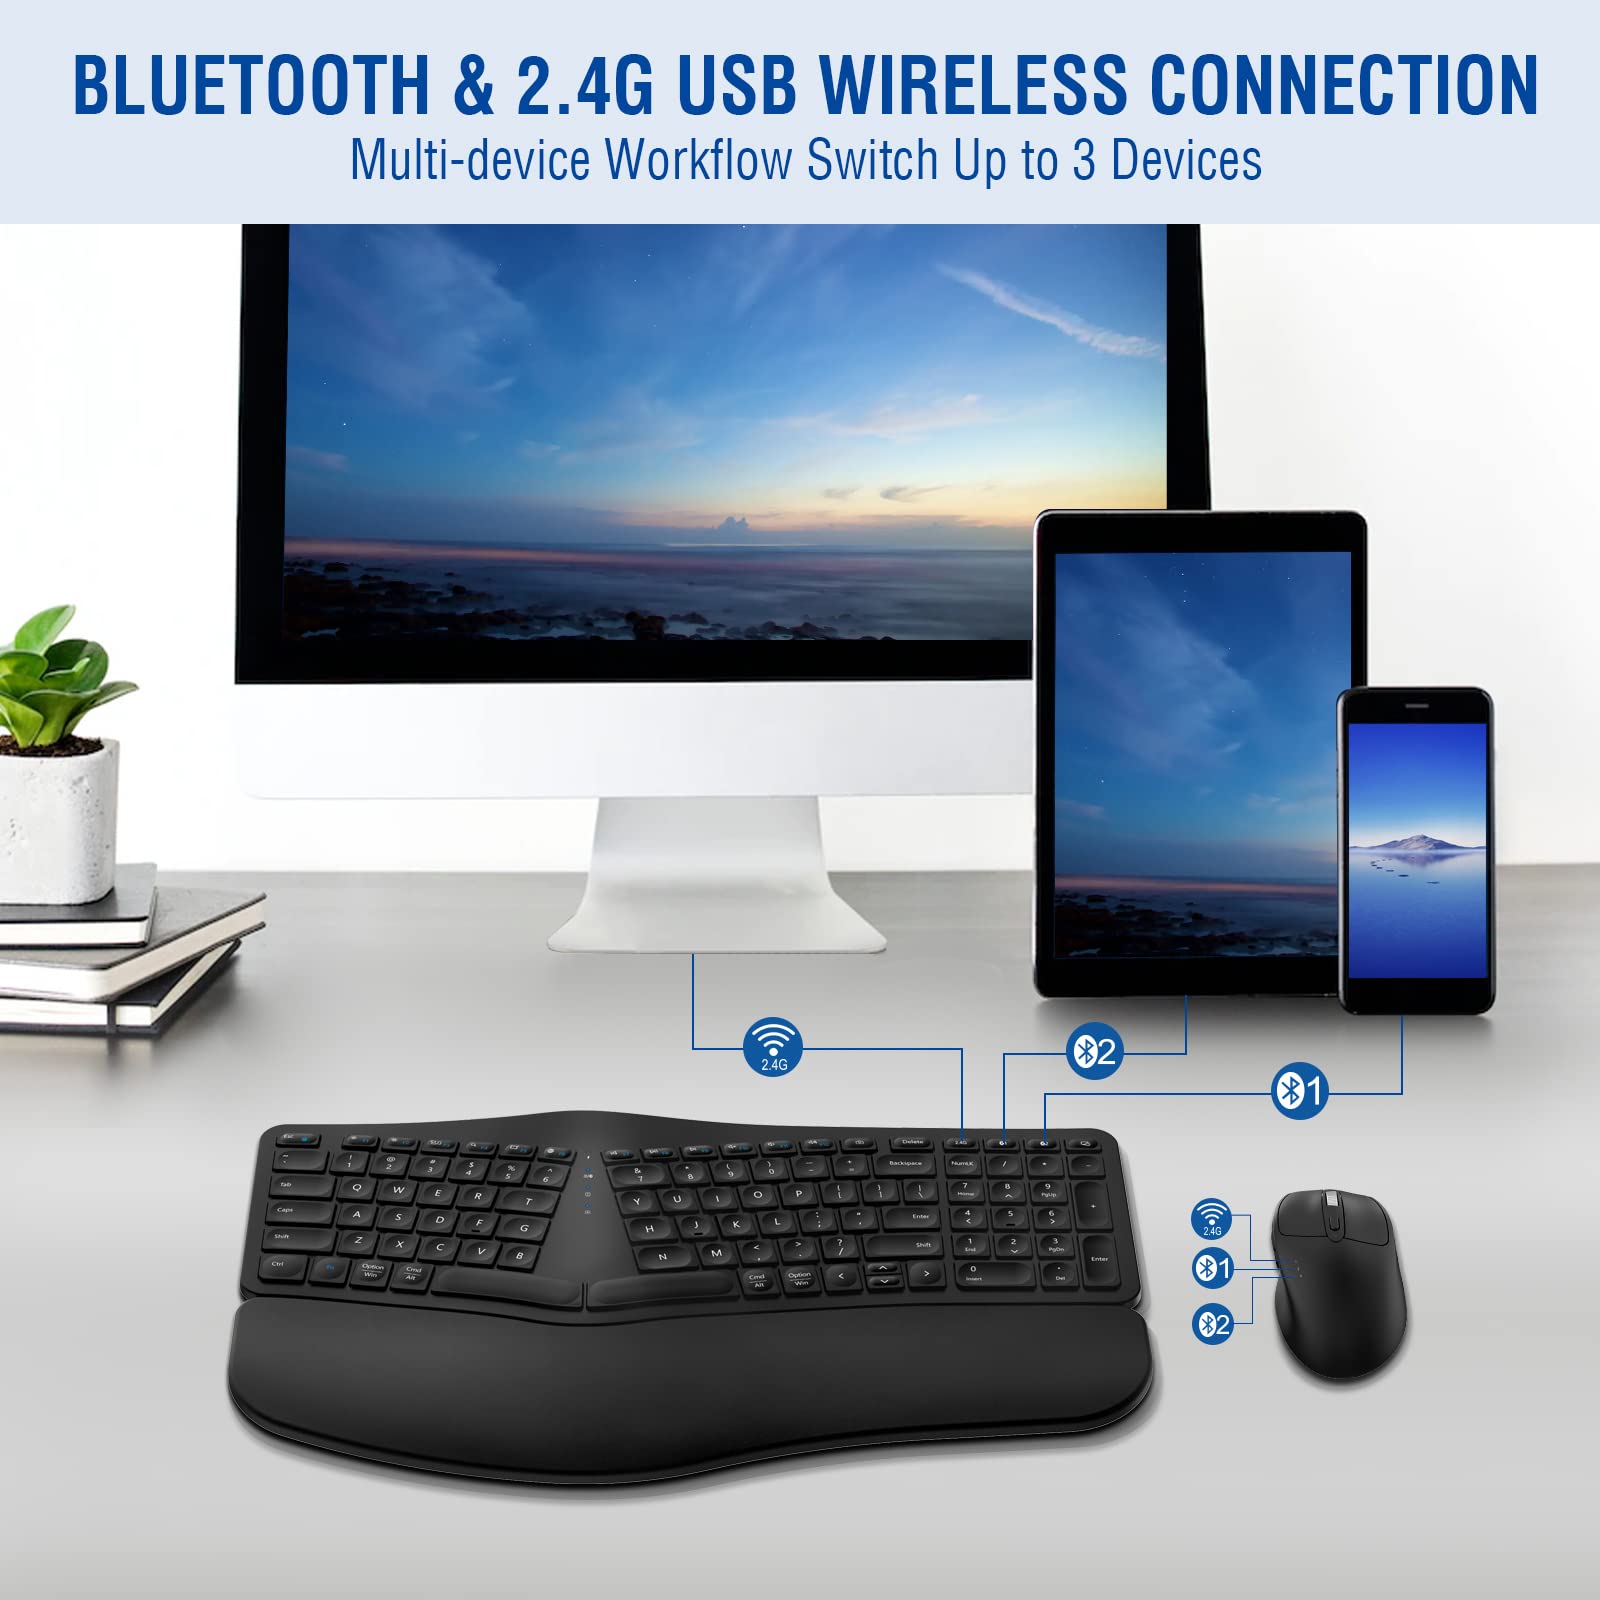 MK960 Ergonomic Wireless Keyboard Mouse Combo, Bluetooth/2.4G Split Design Keyboard with Palm Rest and 4 Level DPI Adjustable Wireless Mouse Multi-Device, Rechargeable, for Windows/Mac/Android(Black)